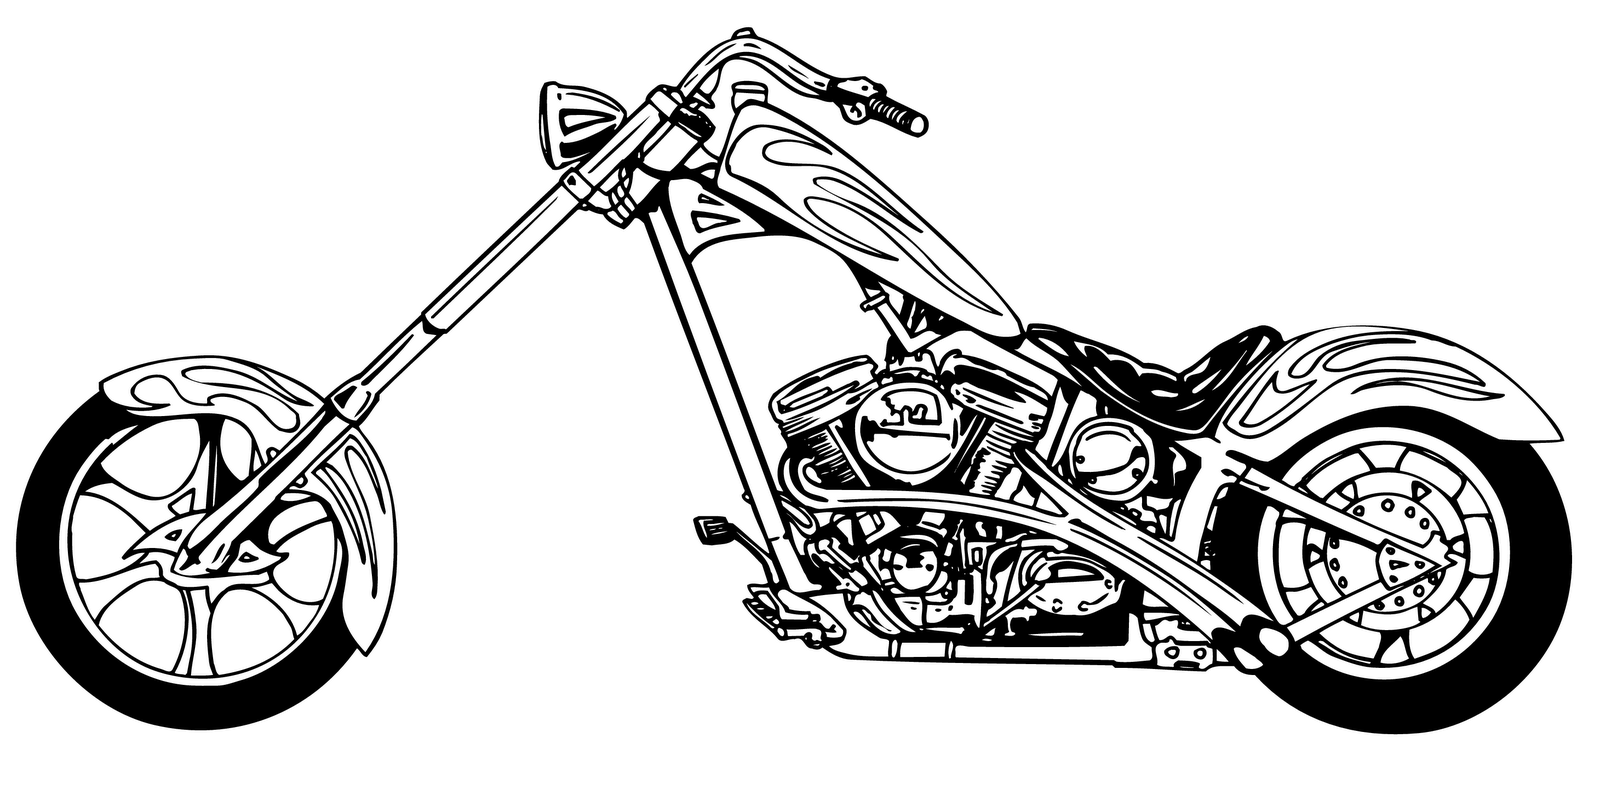 Free motorcycle clipart motorcycle clip art pictures